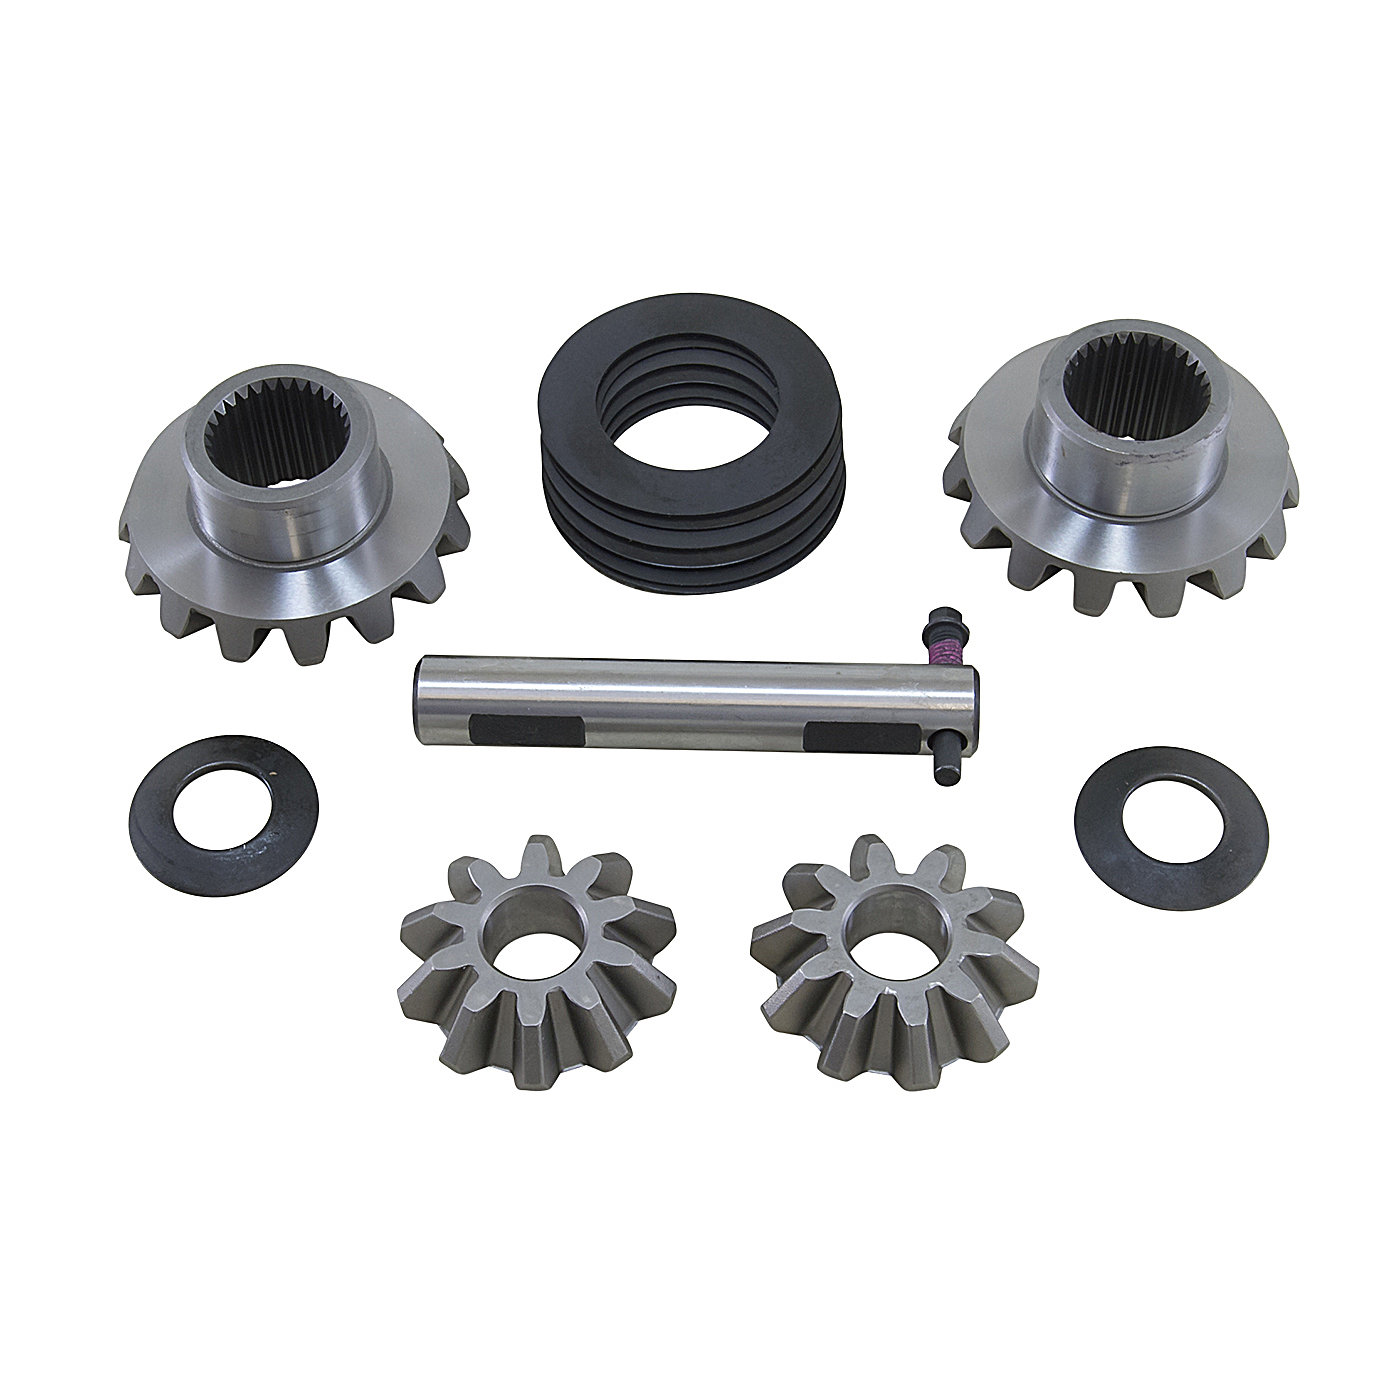 Yukon Gear & Axle Standard Spider Gear Set for 97-01 Jeep Cherokee with ...